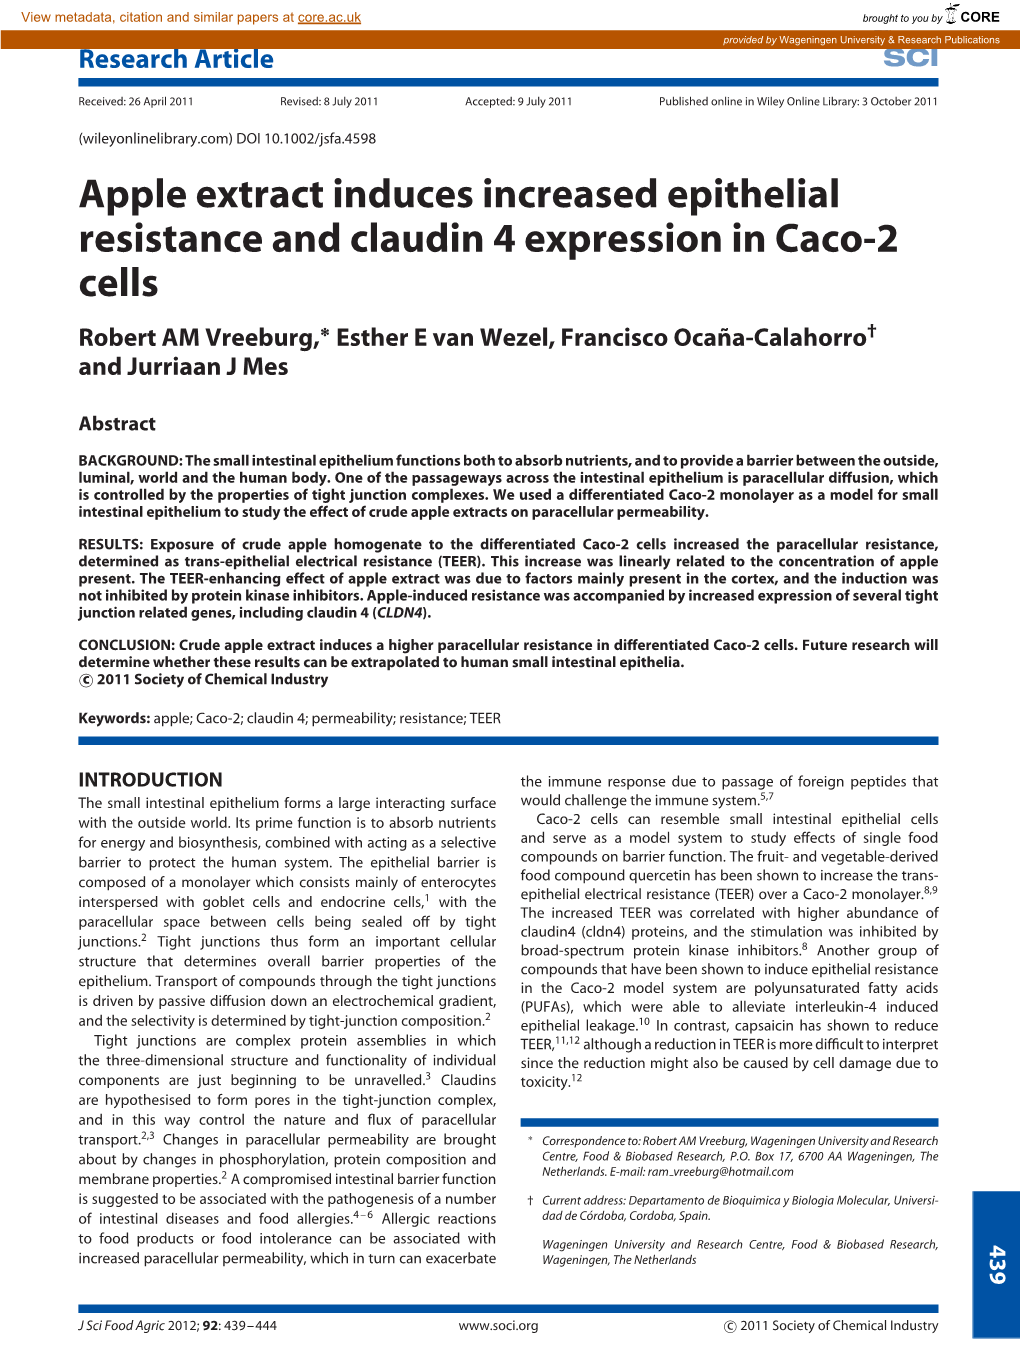 Apple Extract Induces Increased Epithelial Resistance and Claudin 4